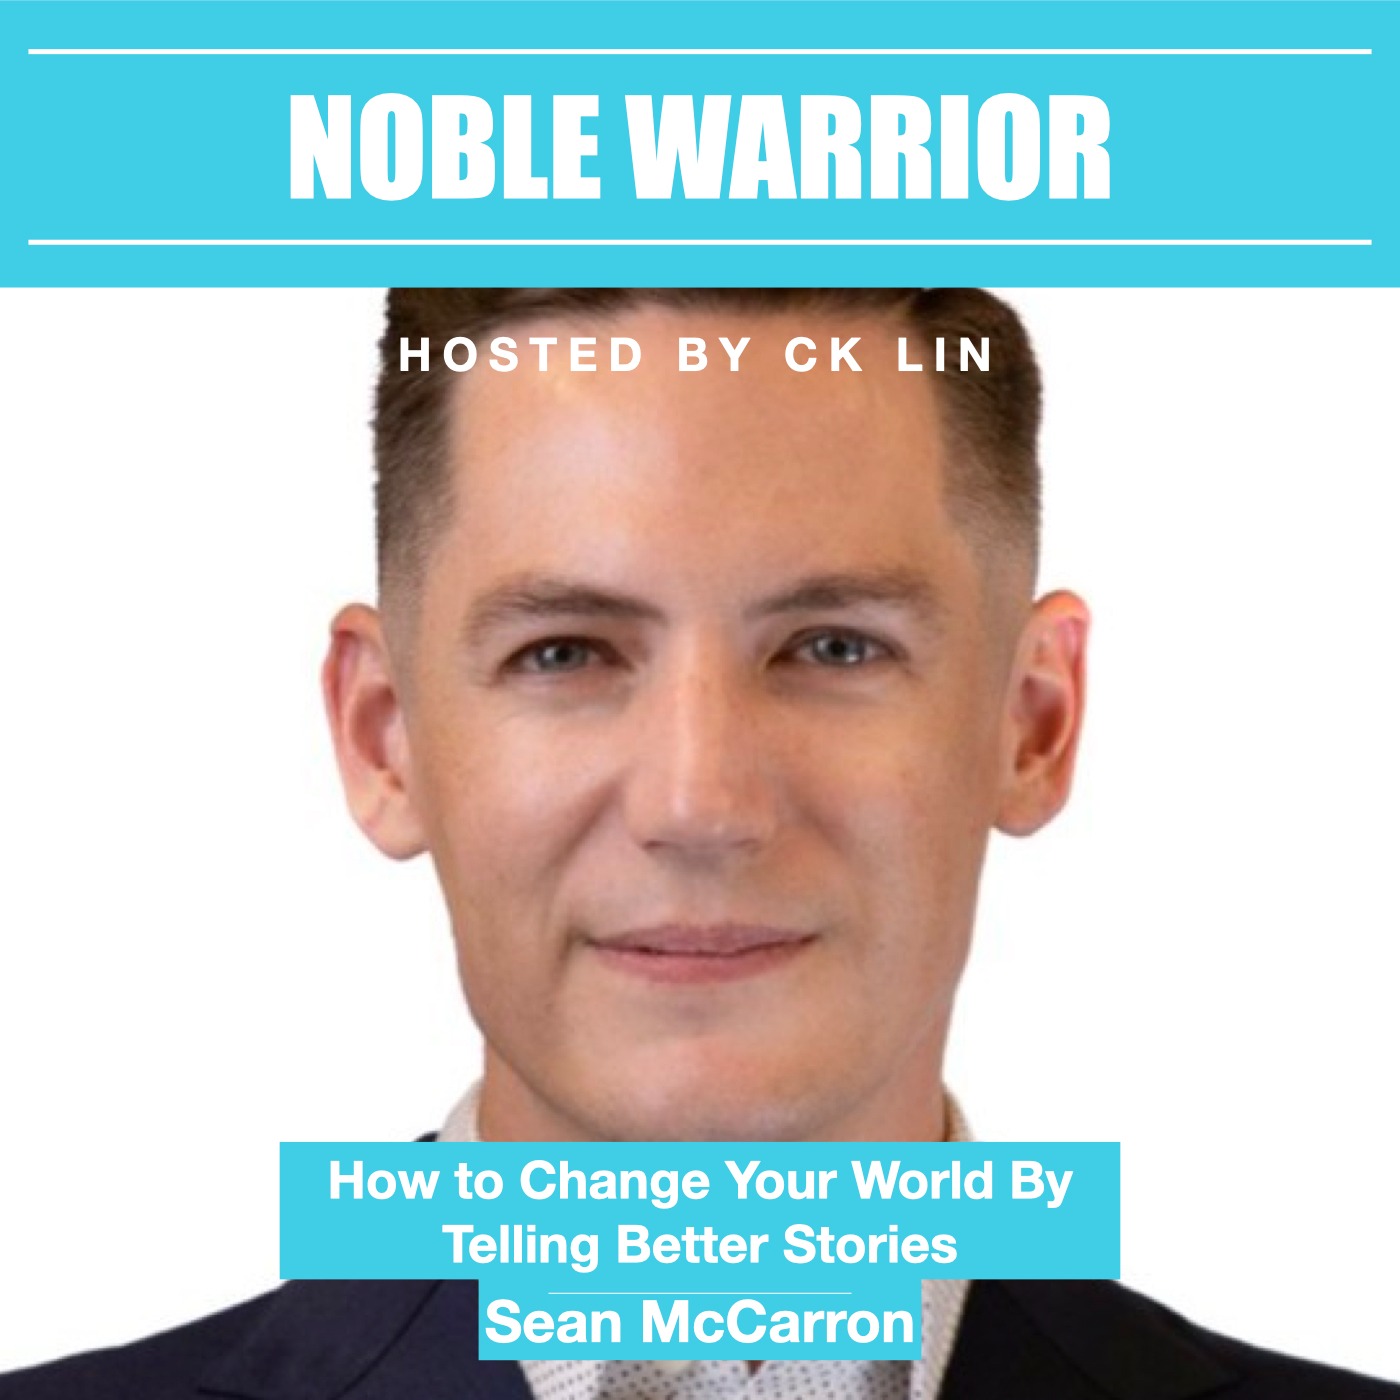 011 Sean McCarron: How to Change Your World By Telling Better Stories Image